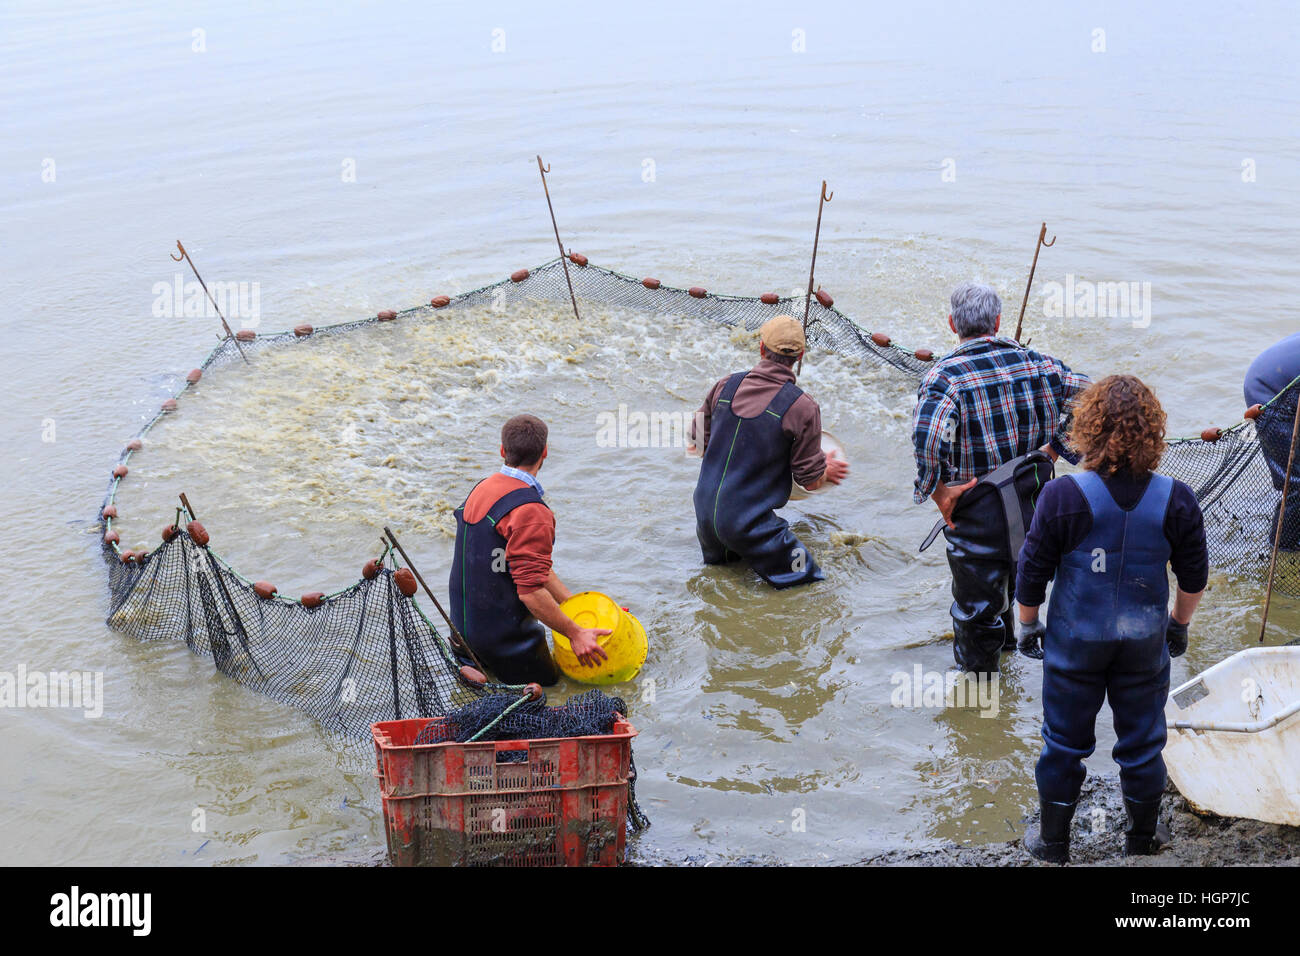 Fishing in a pond, Regional Natural Reserve of Brenne, Rosnay, France Stock Photo